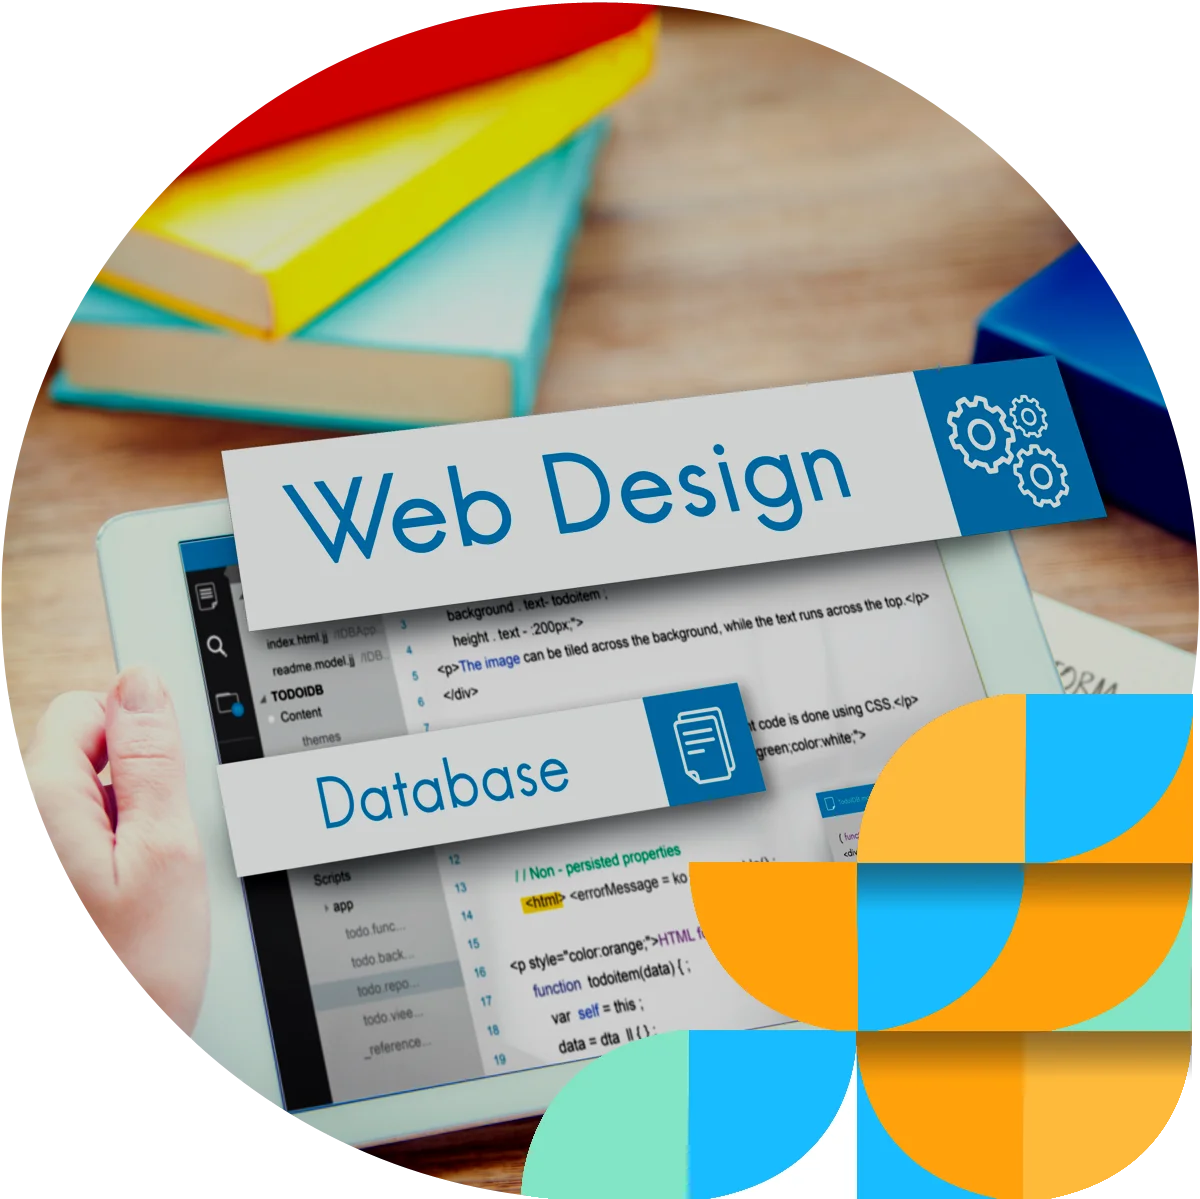 /wp-content/uploads/2019/12/acube-innovations-services-nearshore-magento-3.webp